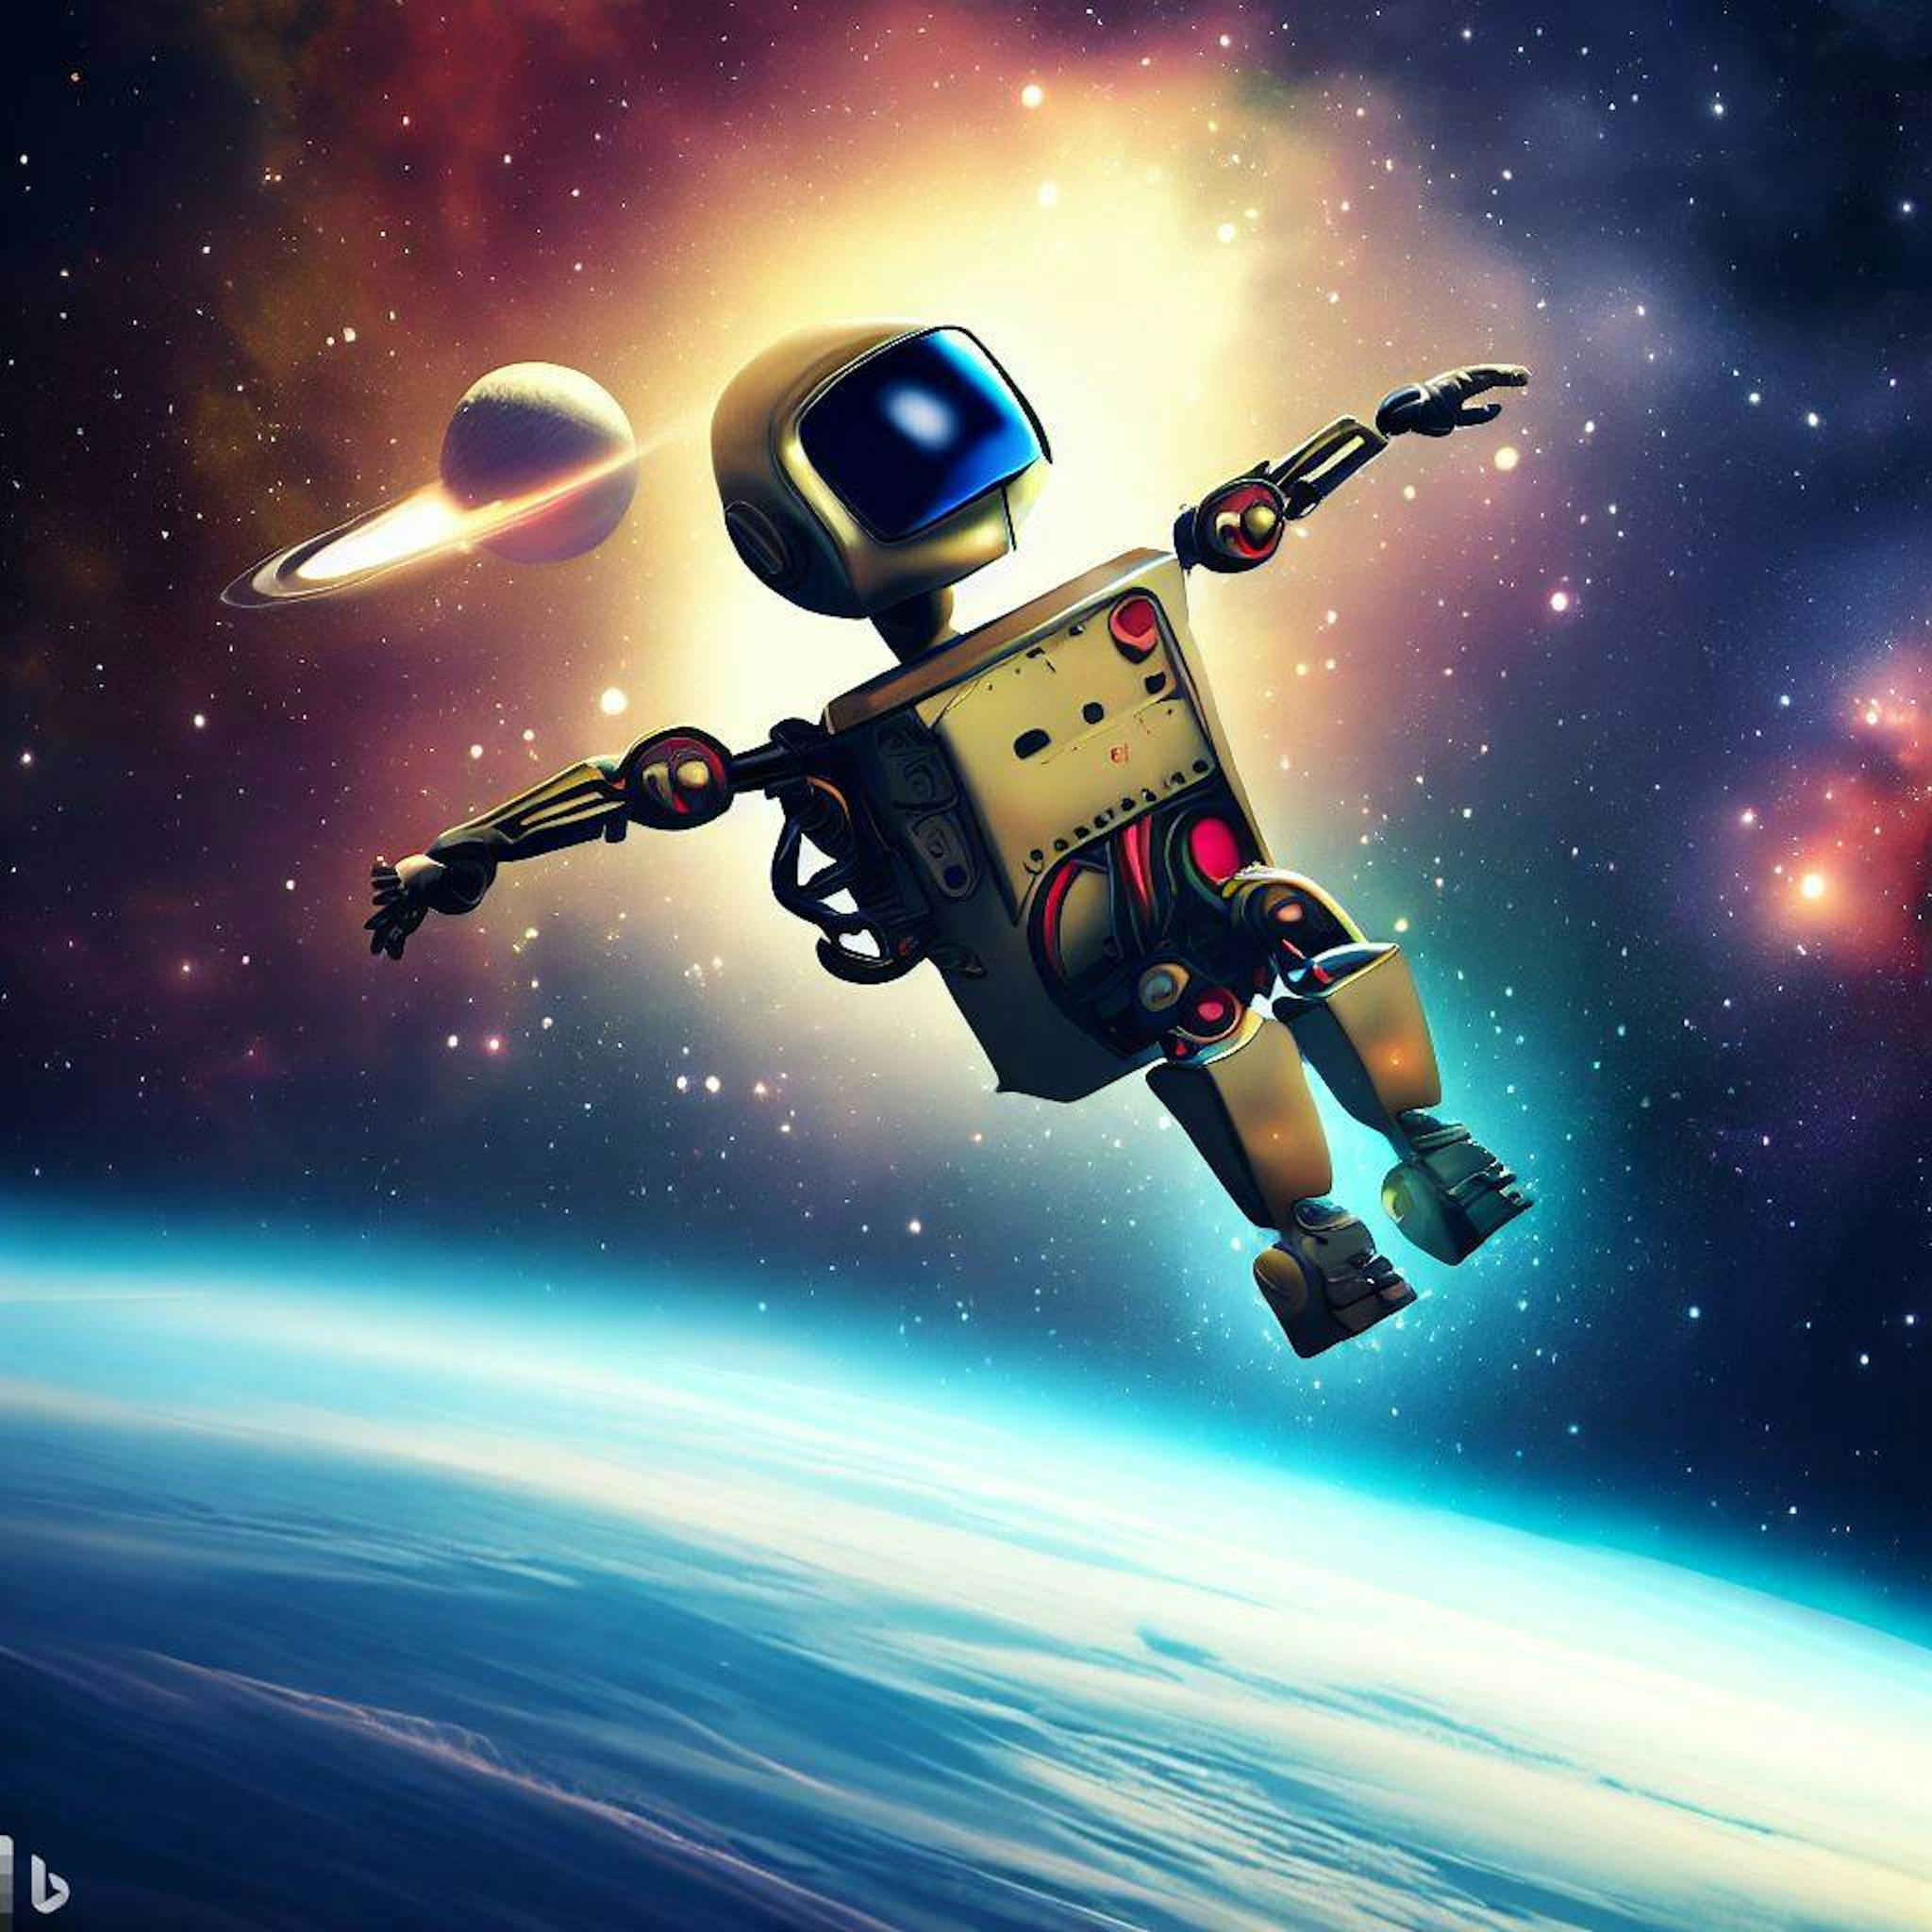  Robot Flying Traveling the Universe